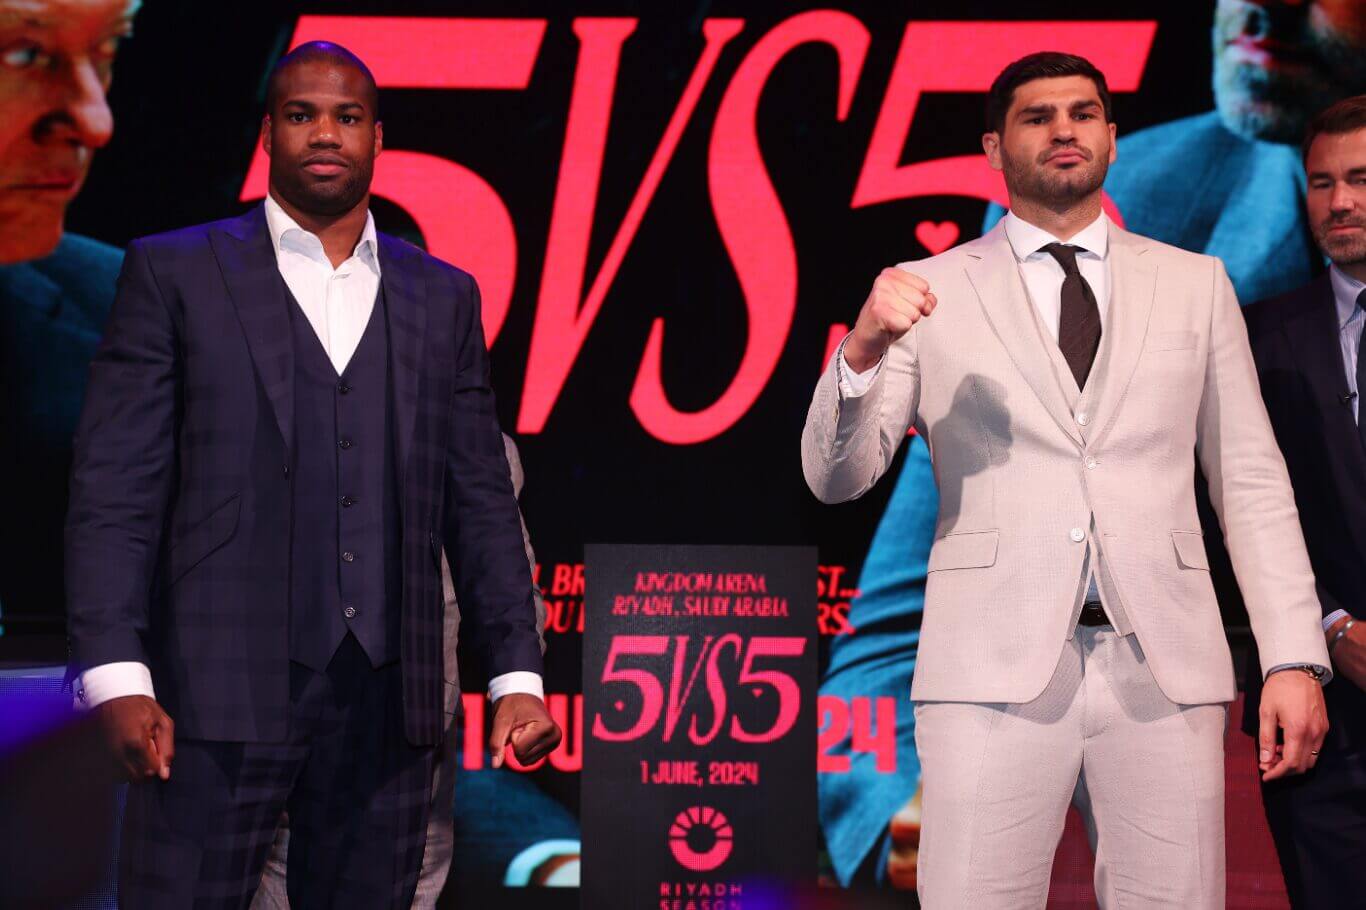 Daniel Dubois and Filip Hrgovic at the press conference to announce their fight